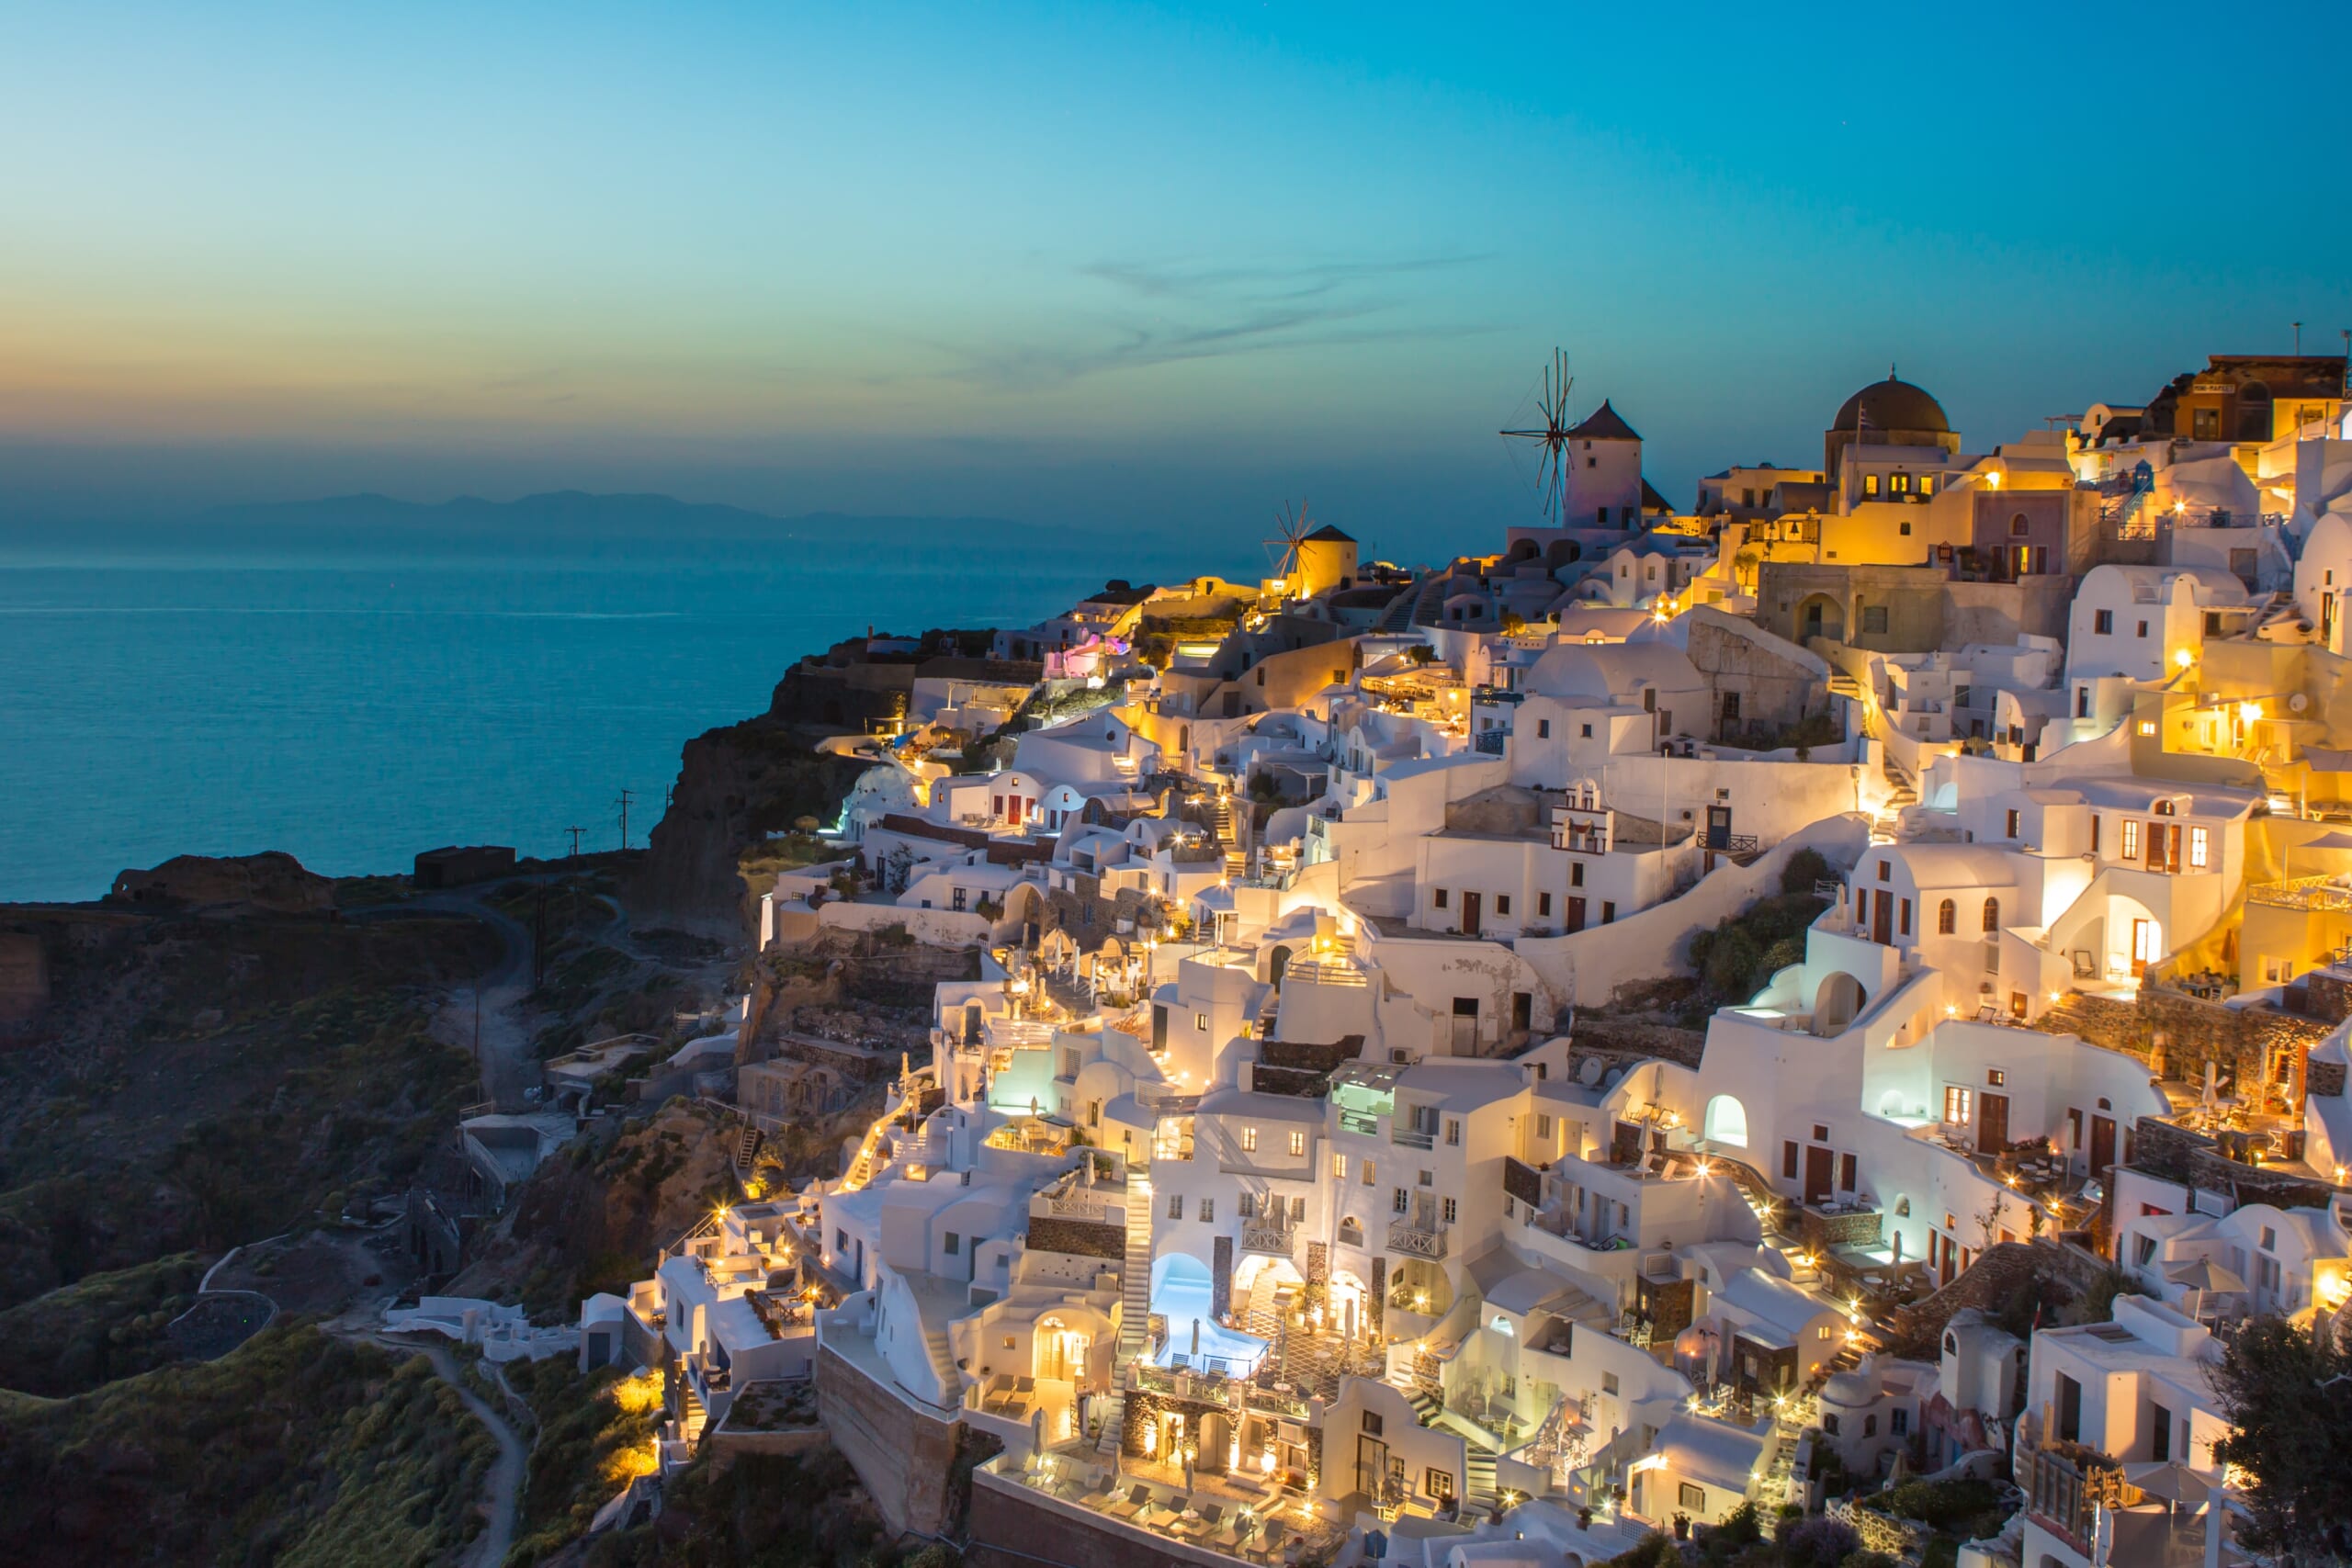 Greece, Oia, Photo by James Ting on Unsplash